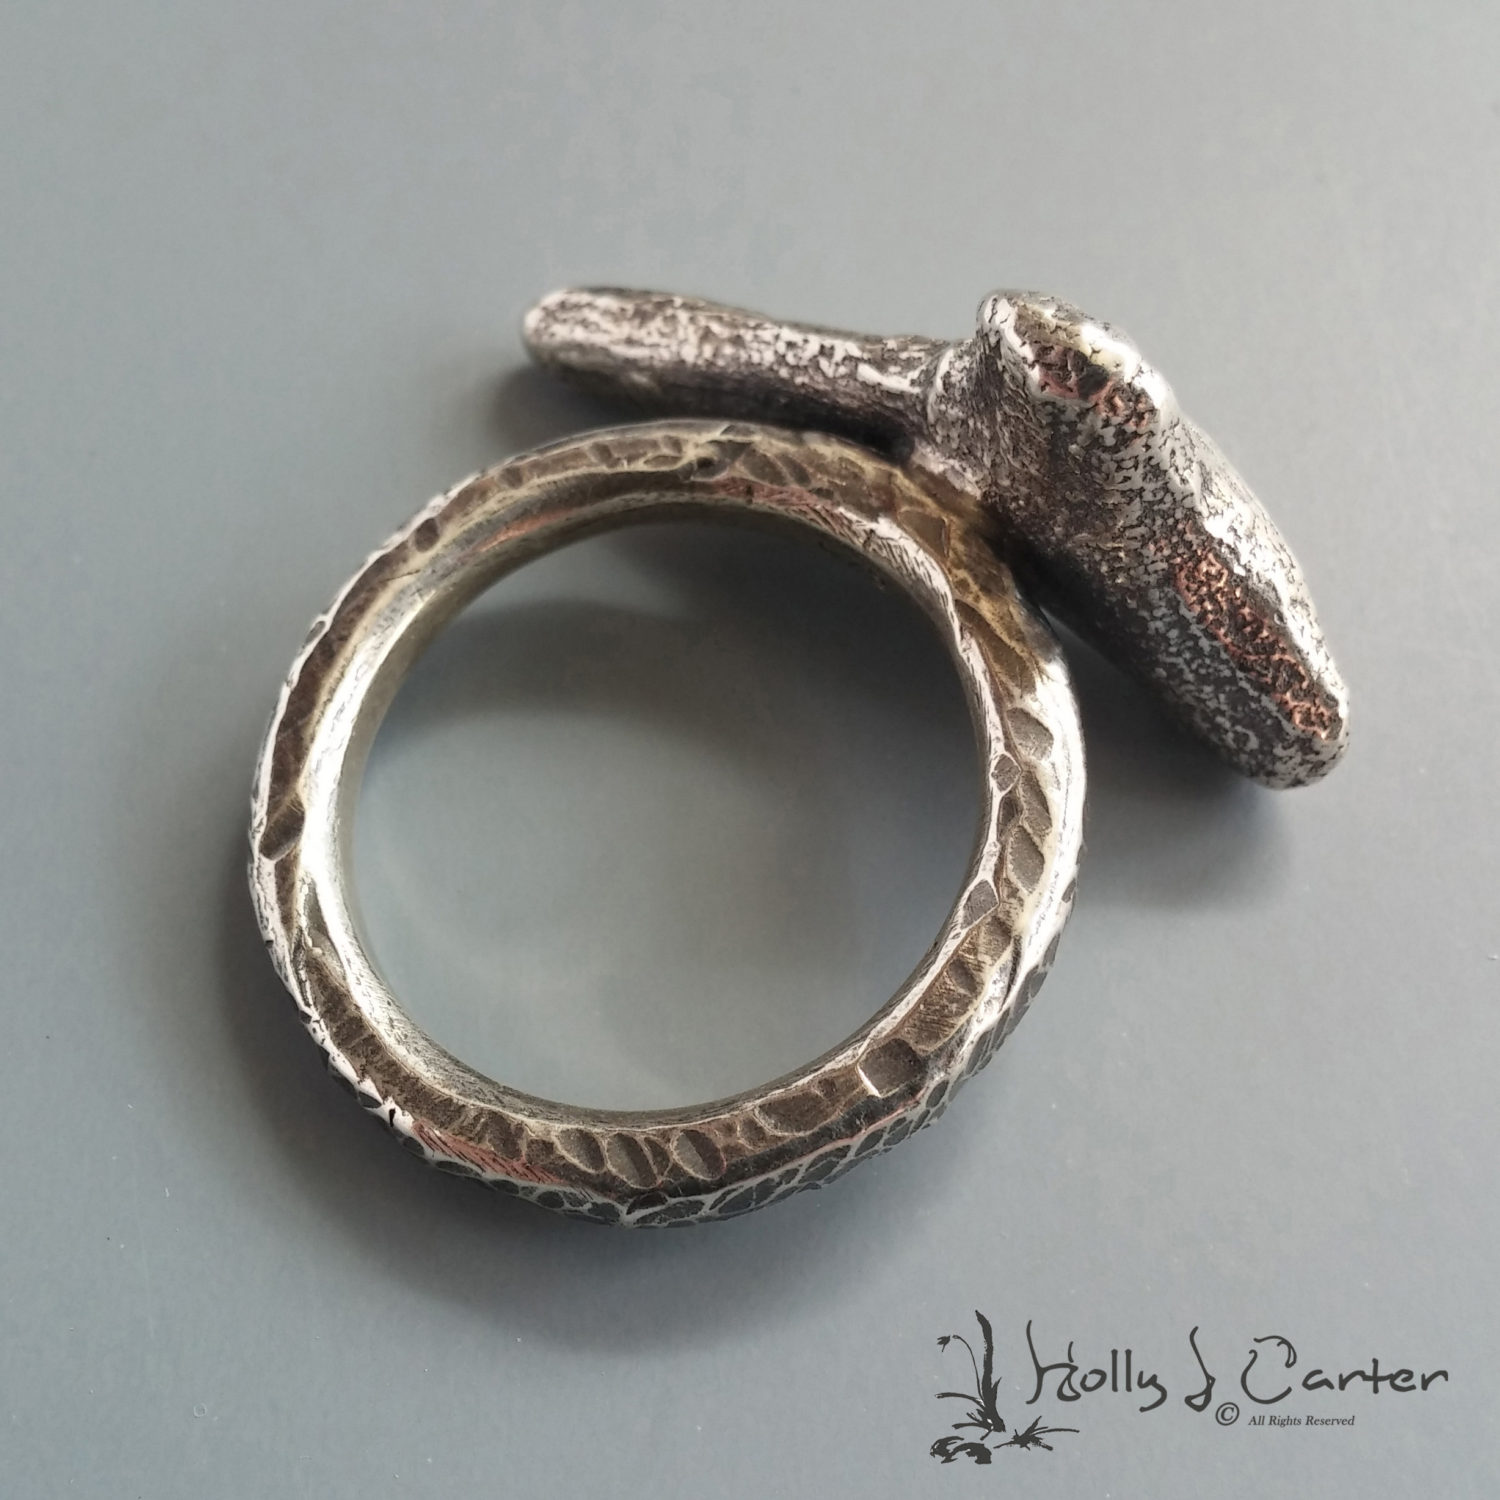 The Beachwood Sterling Silver Ring by Holly J Carter